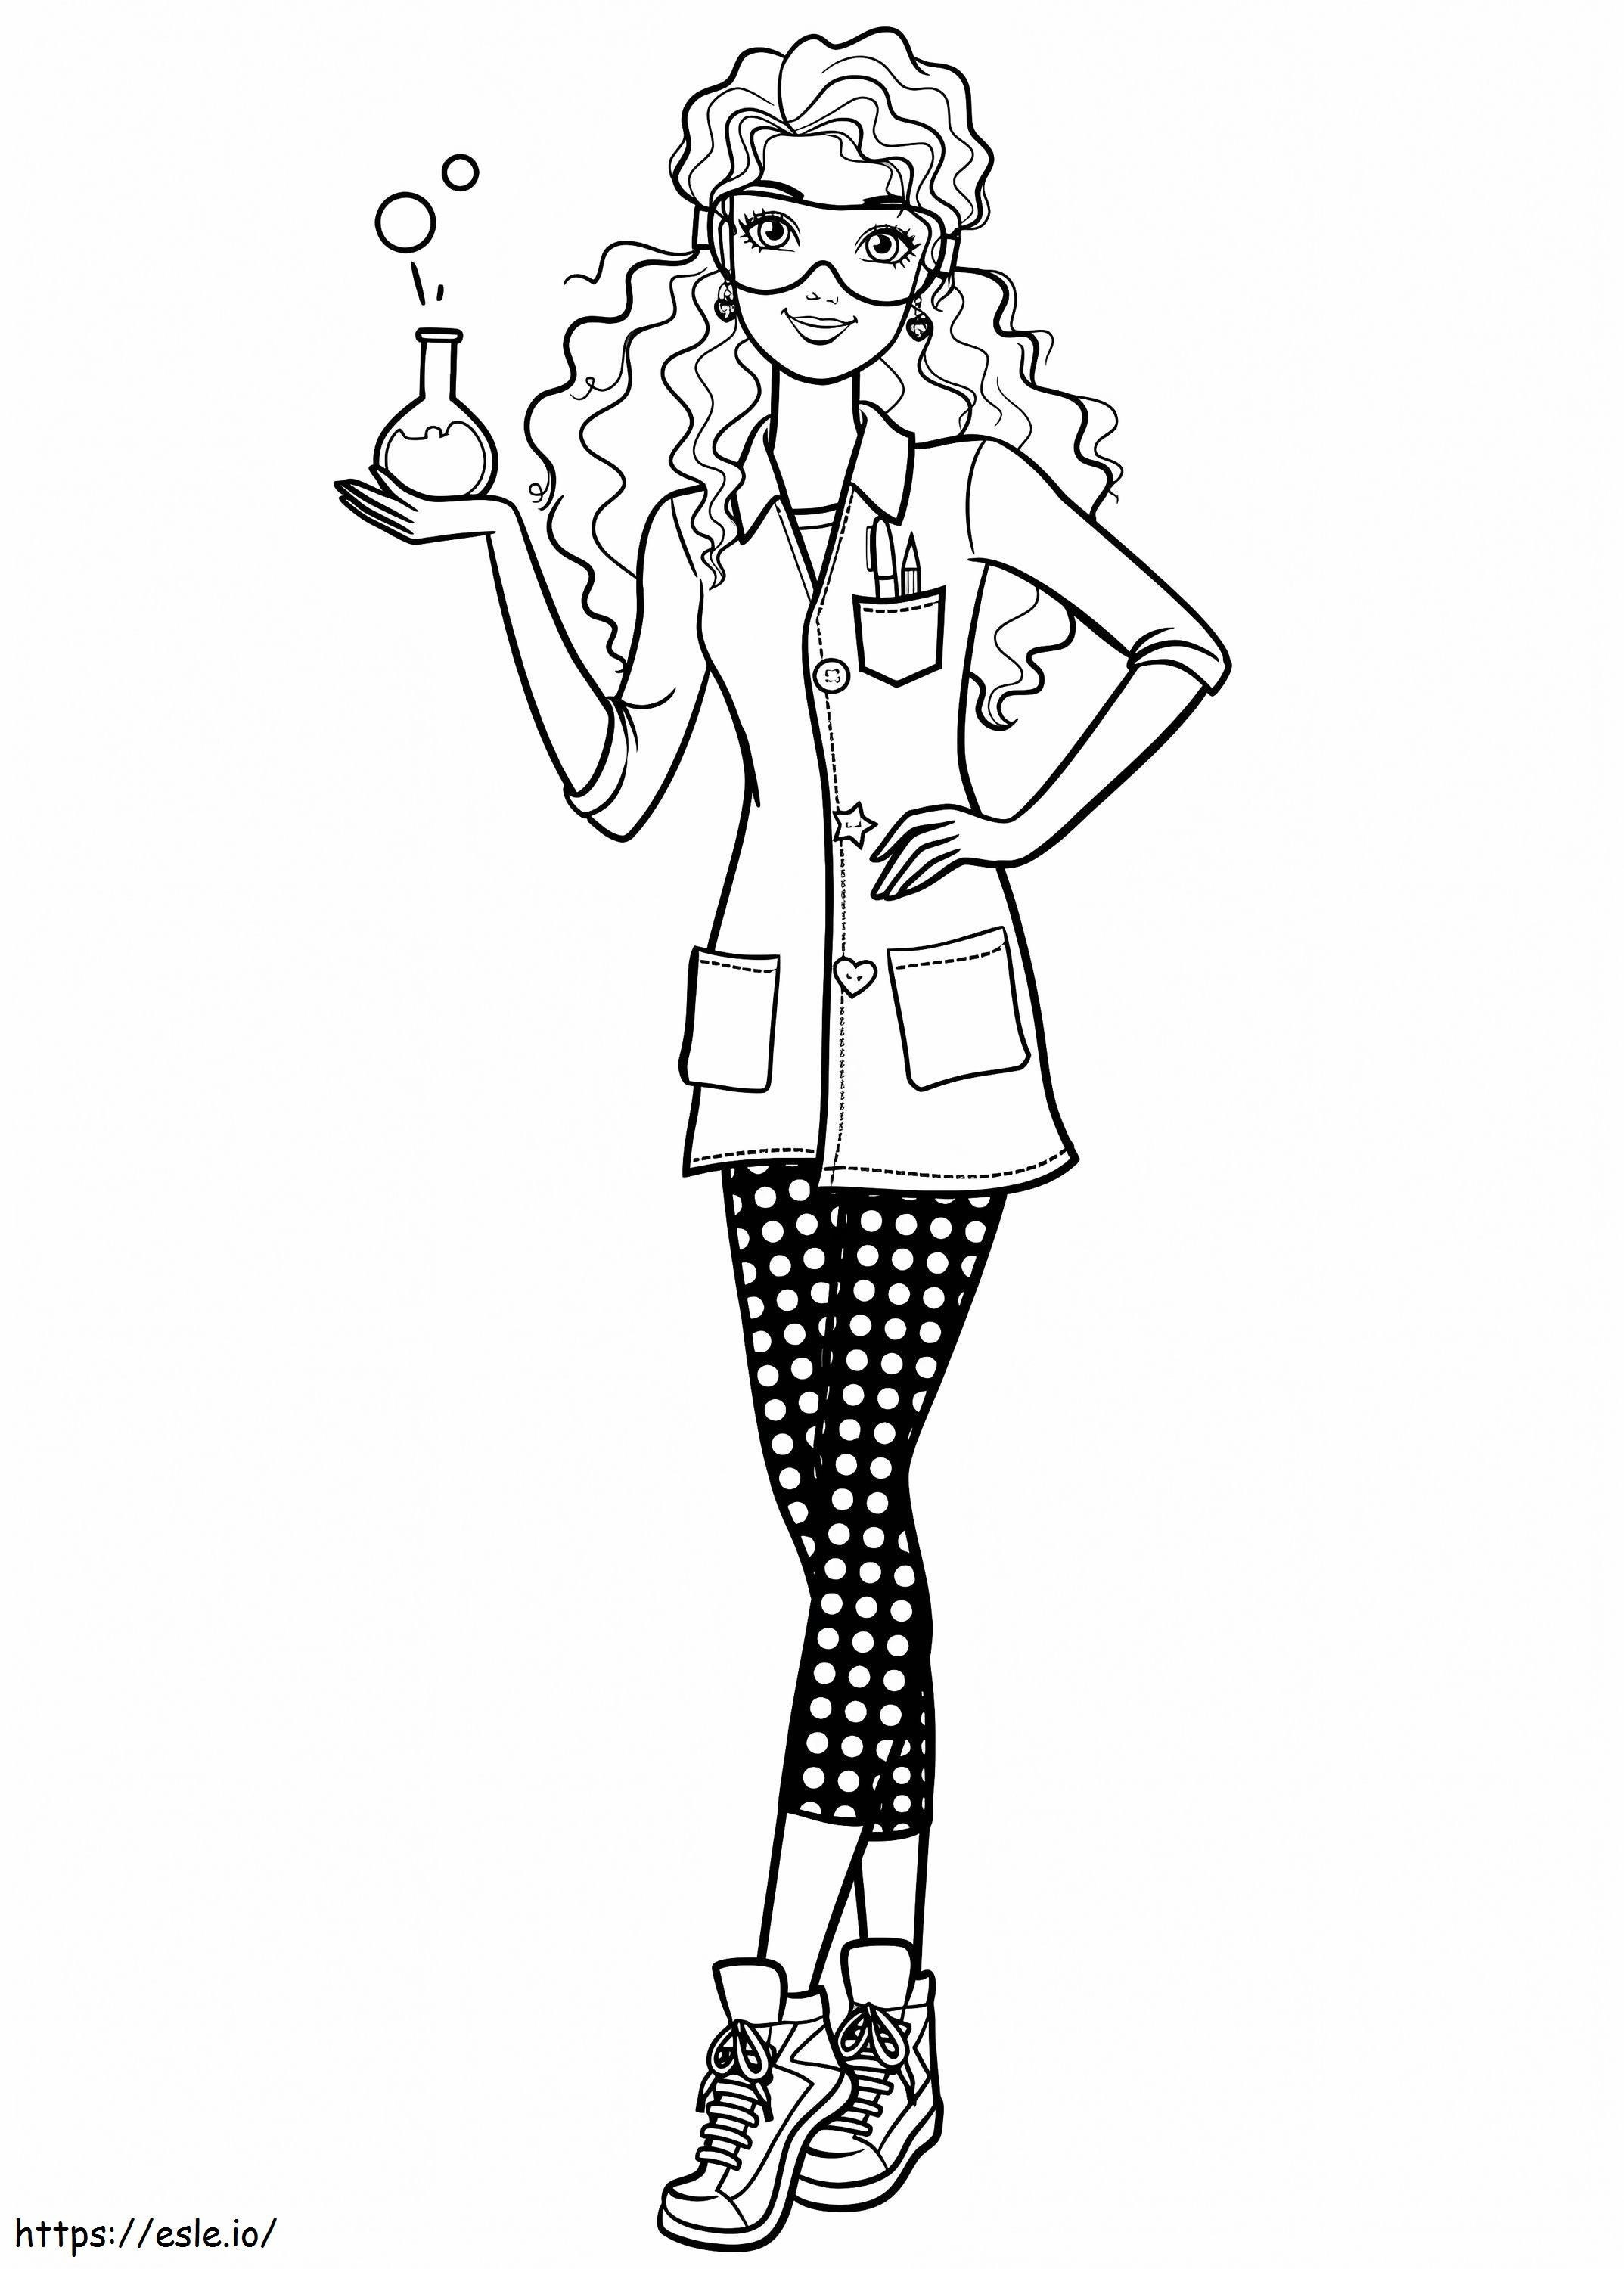 Barbie The Scientist coloring page